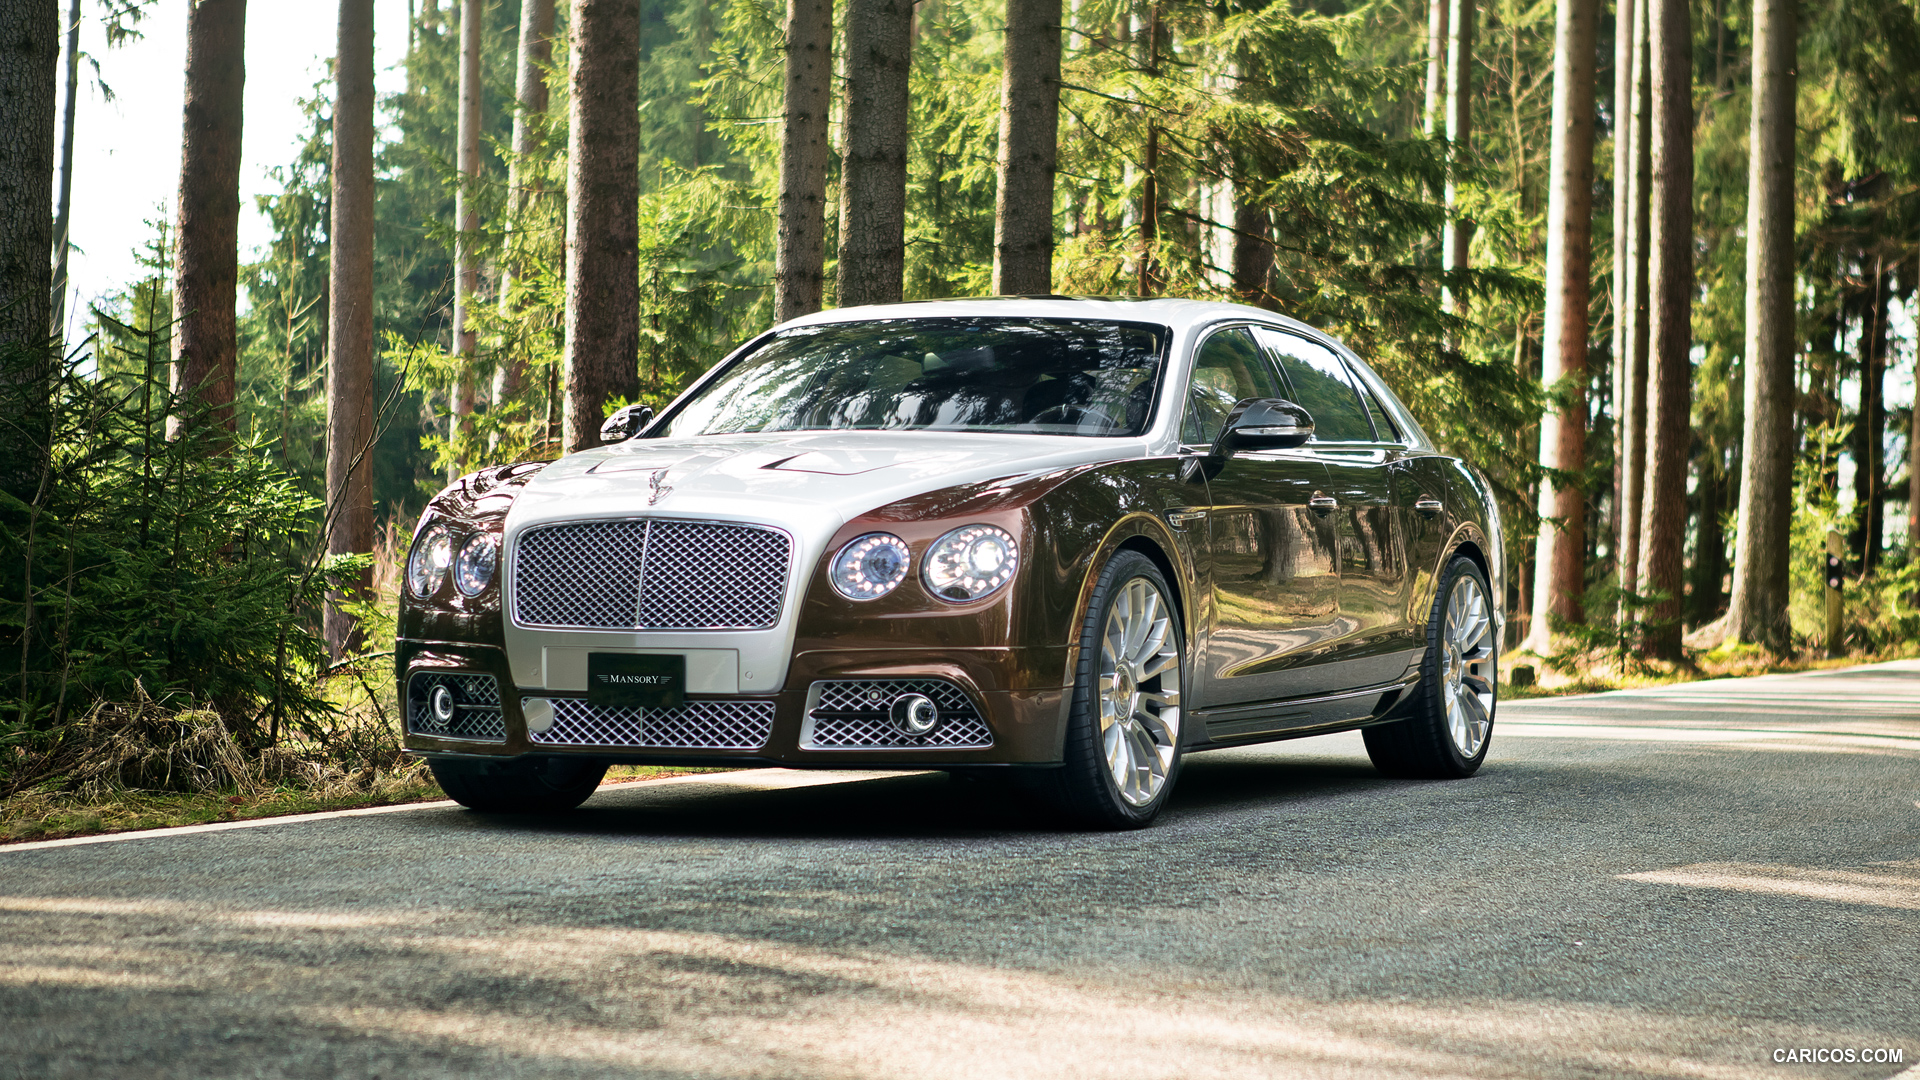 2014 Mansory Bentley Flying Spur with Fog Lights - Front, #1 of 8